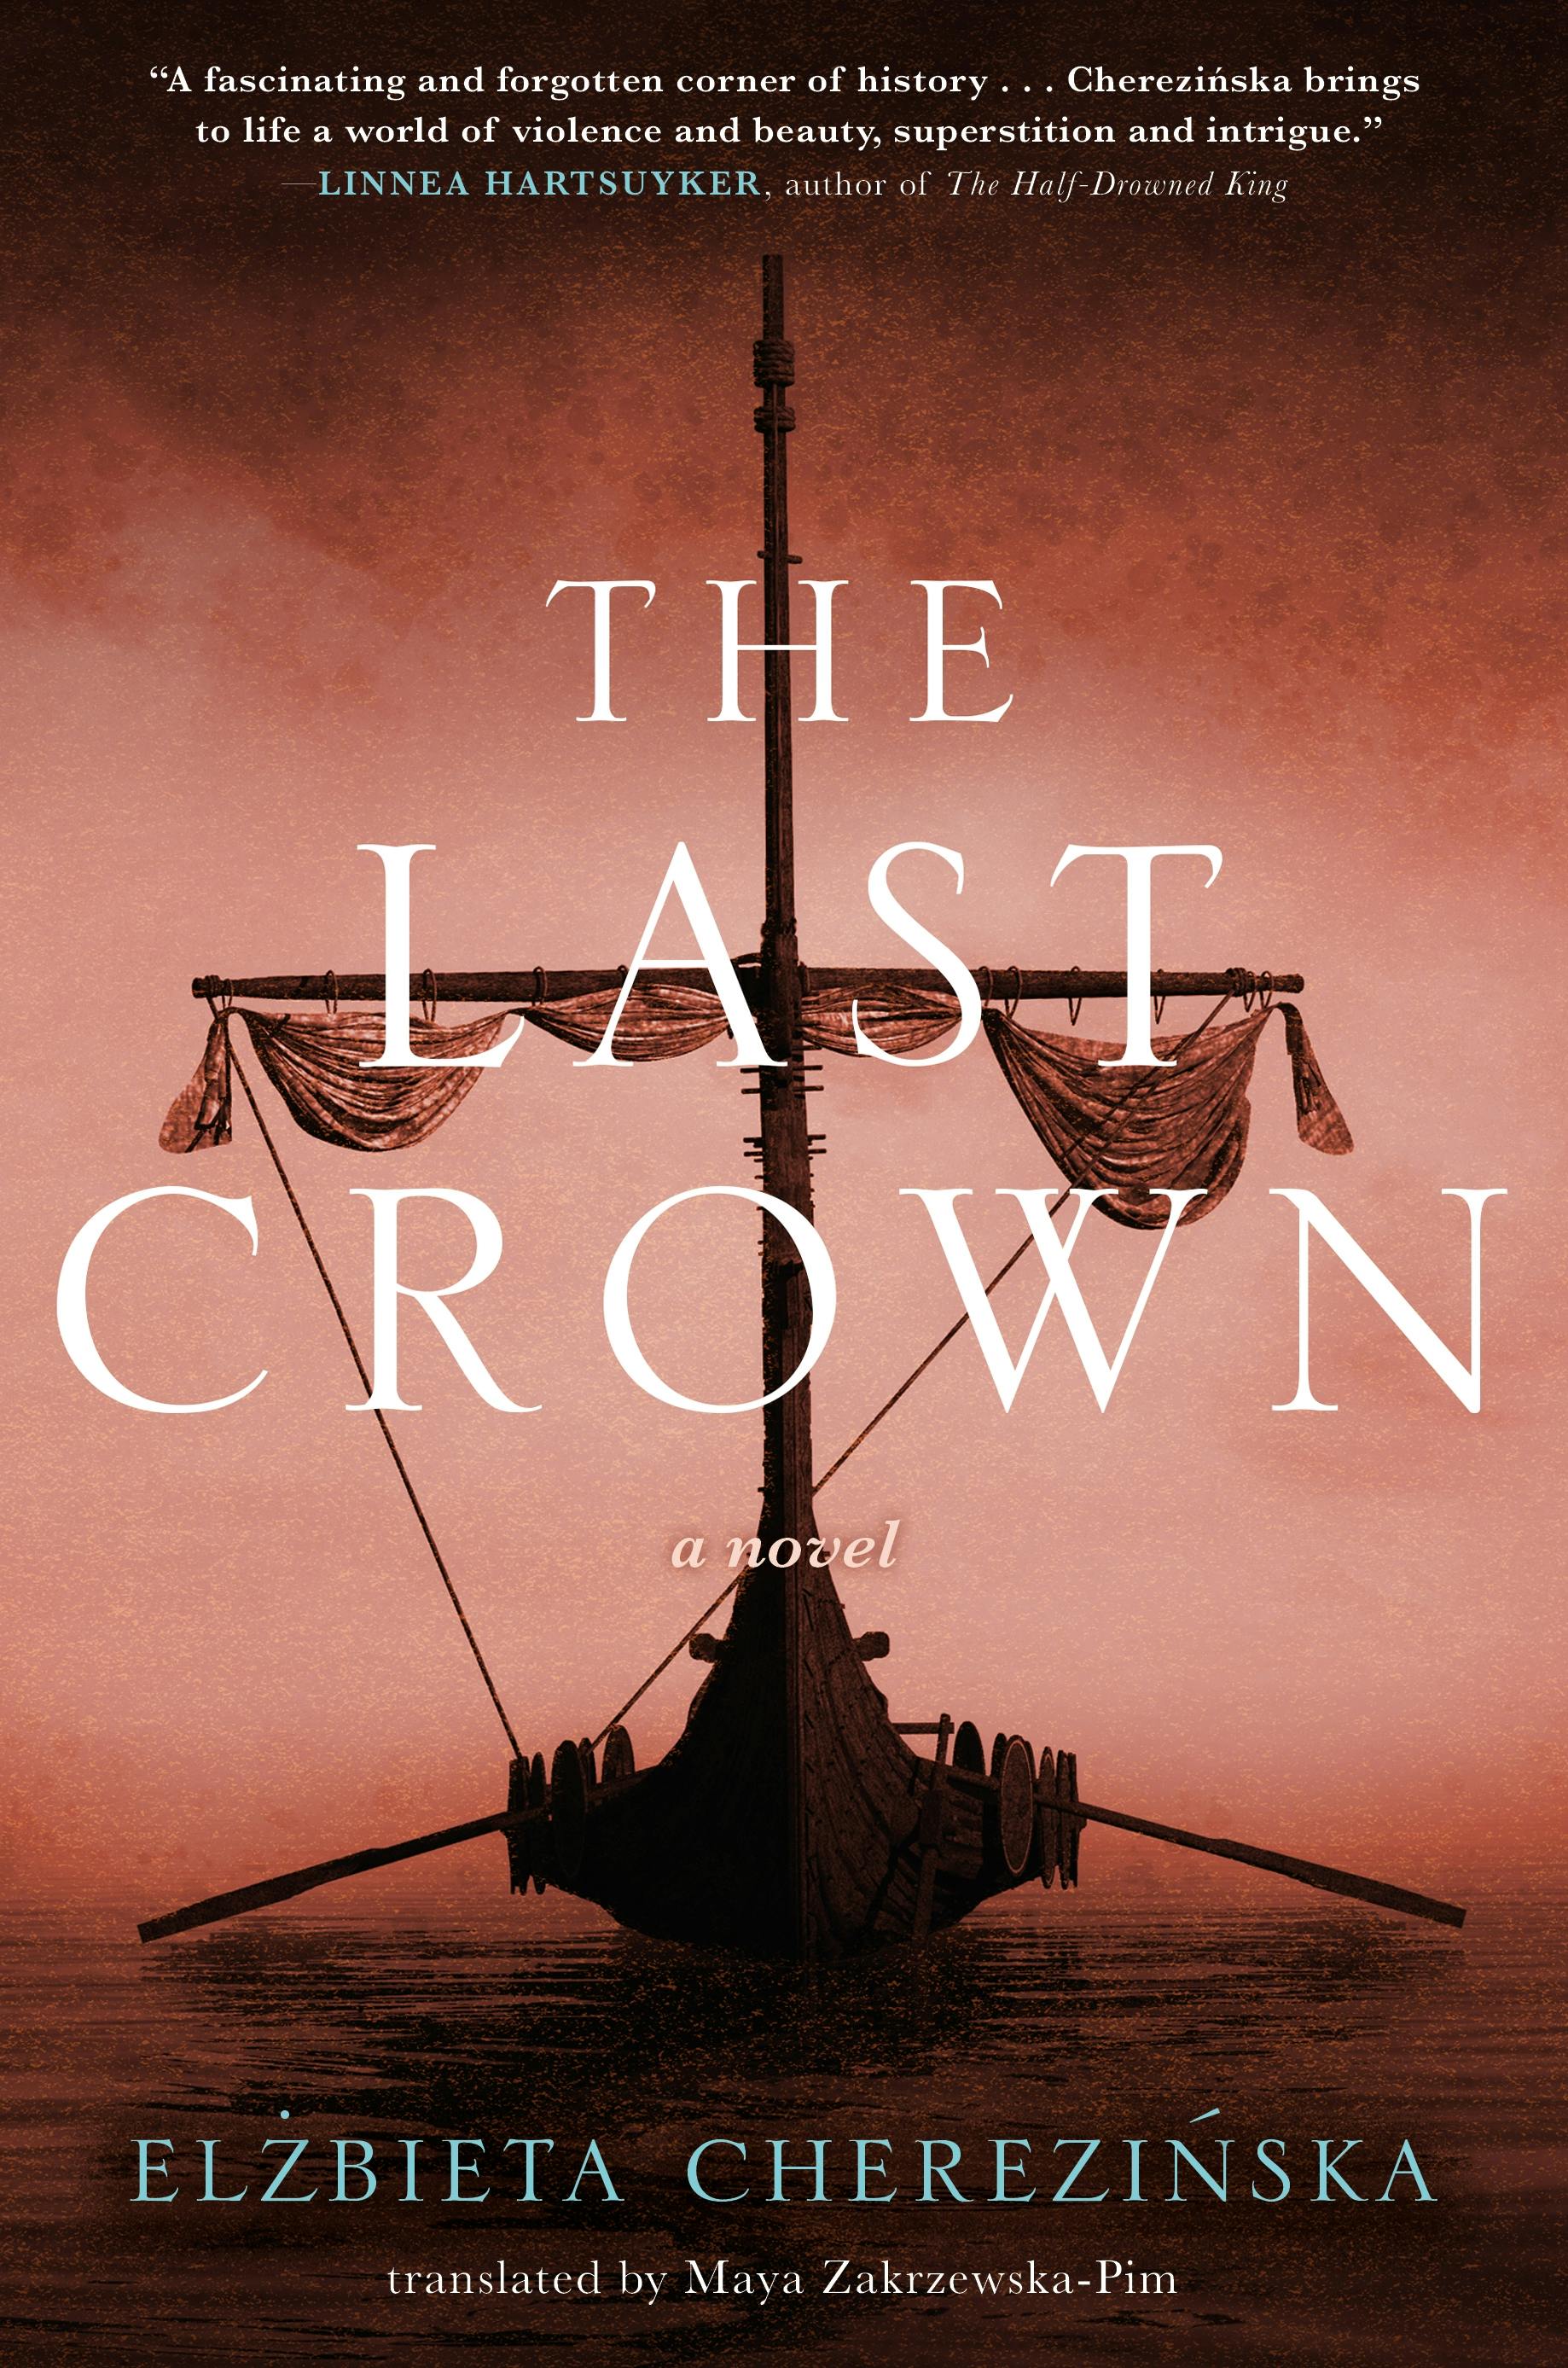 Image of The Last Crown